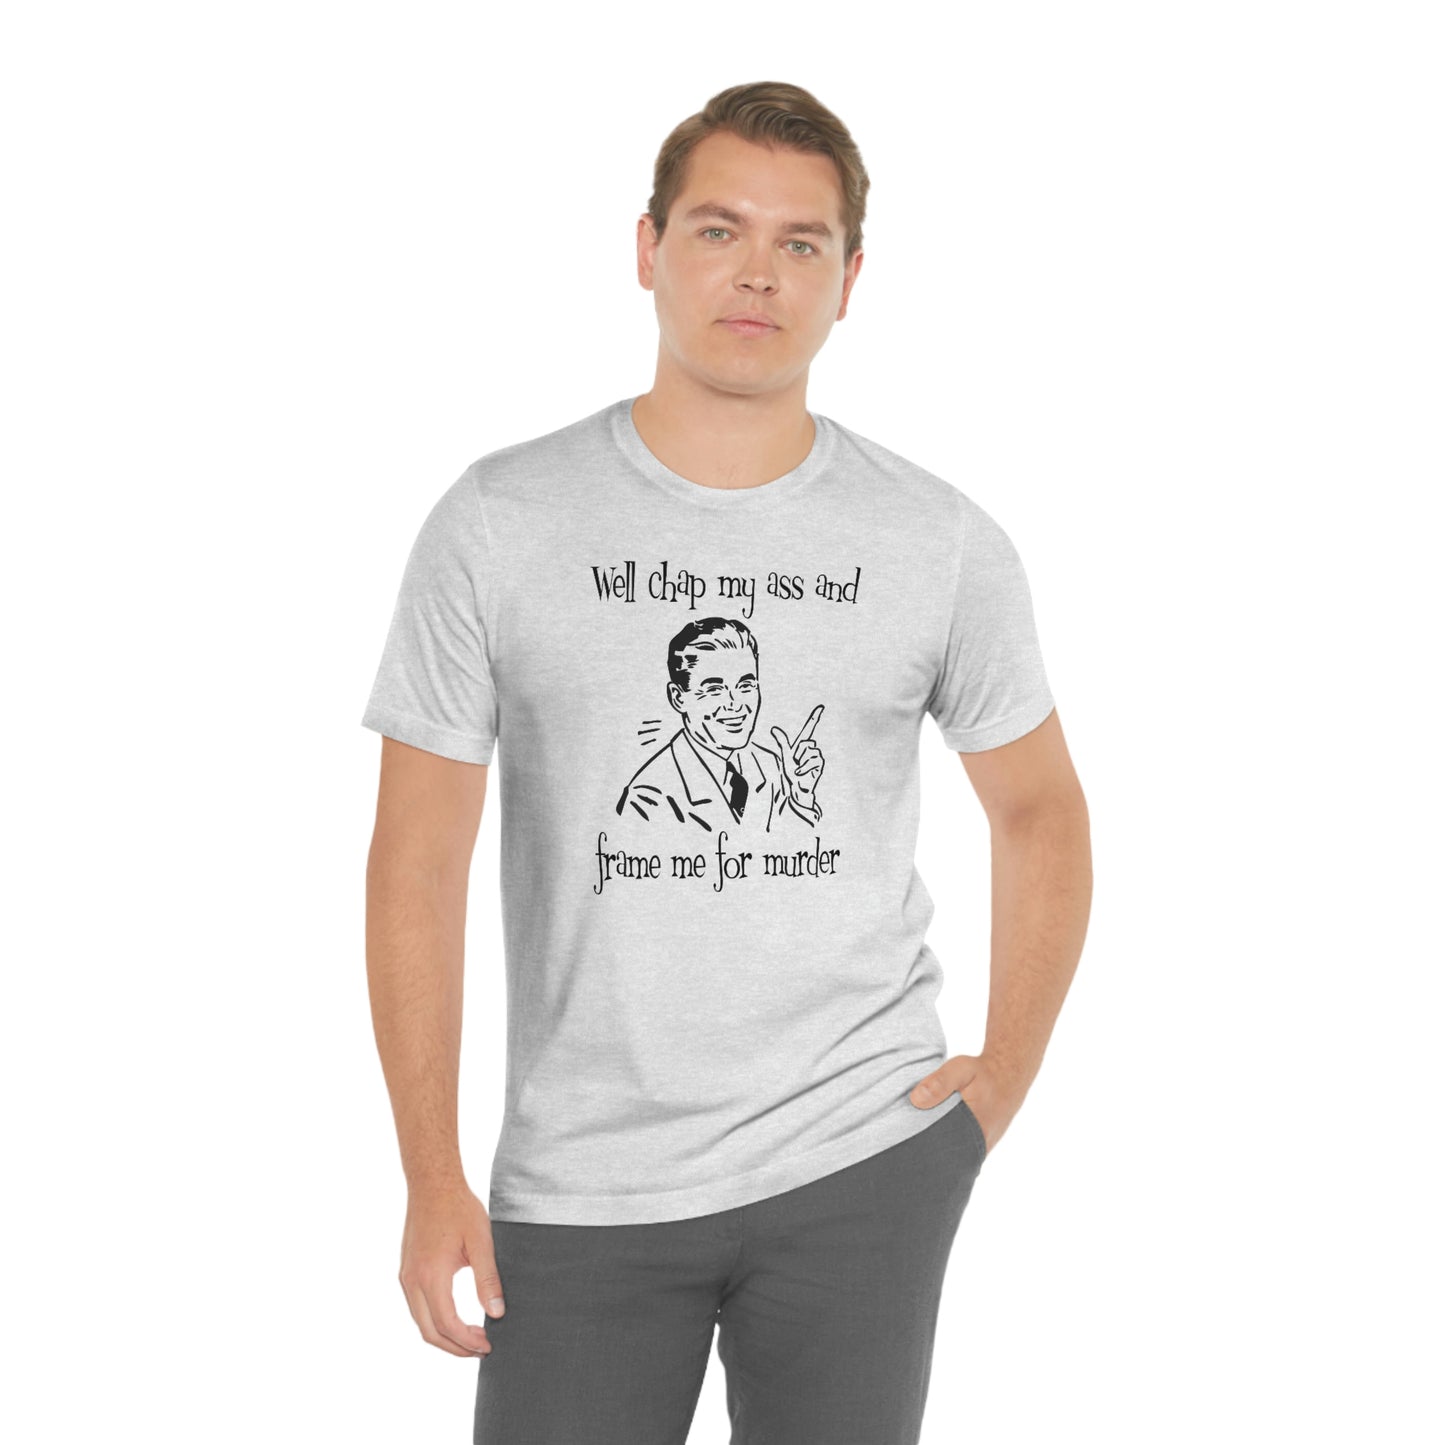 Chap My Ass And Frame Me For Murder Tee